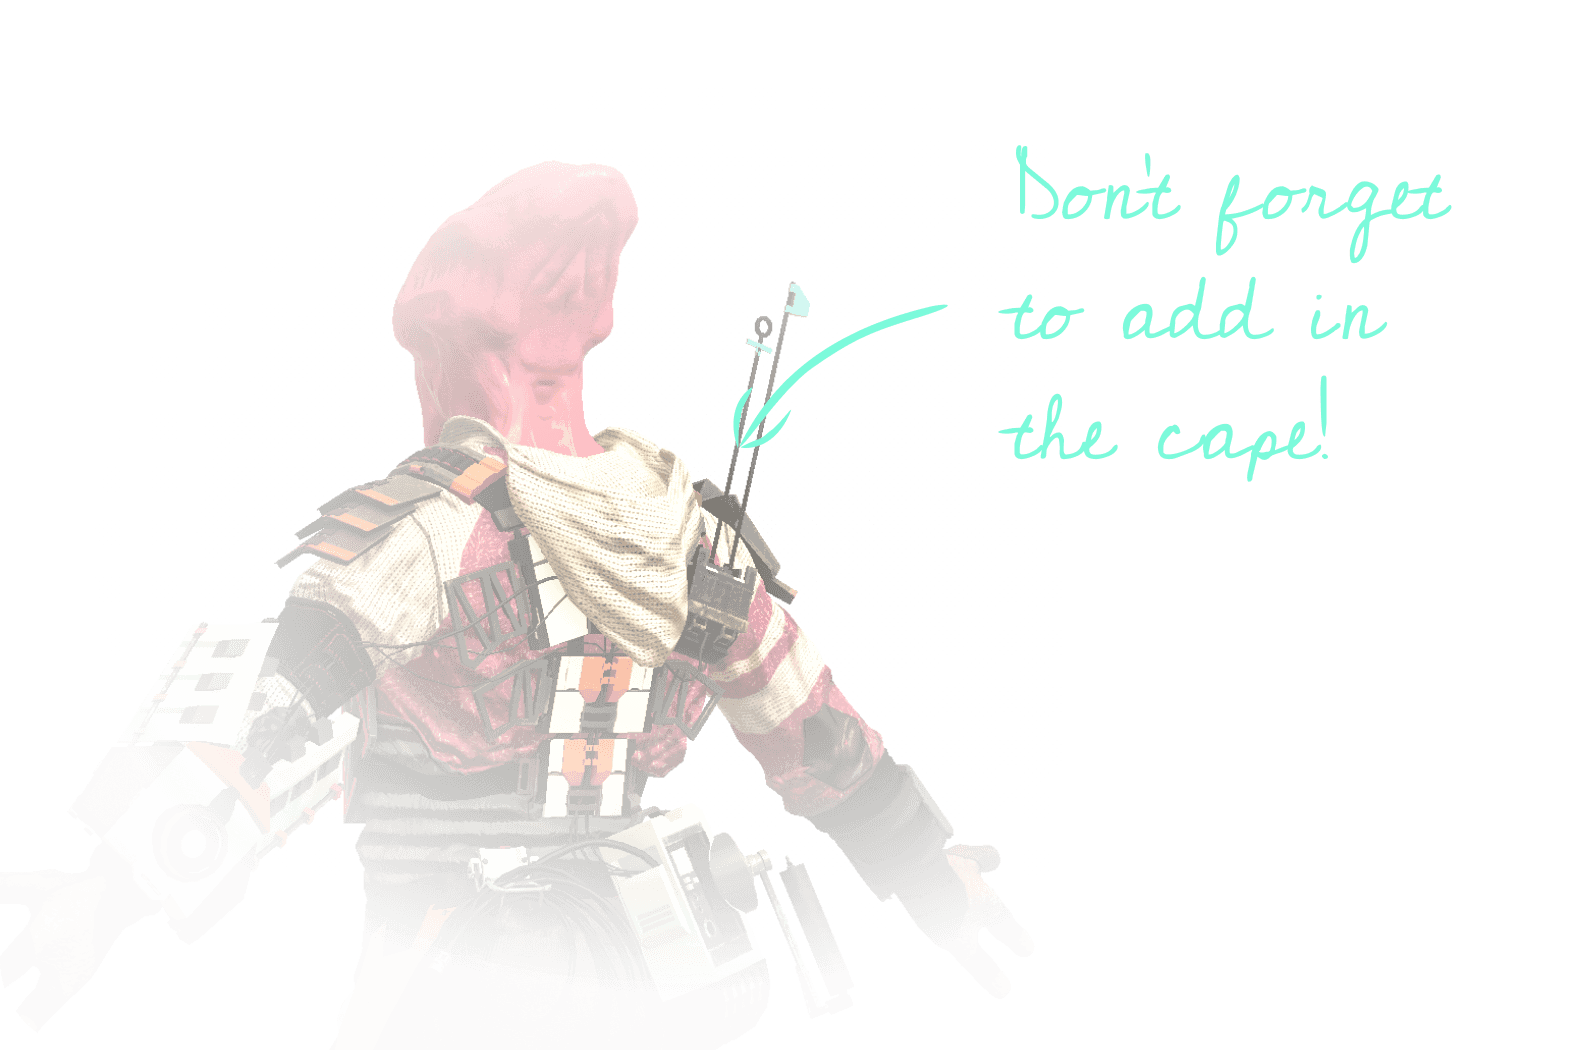 Boots model in normals, UVs and wireframe